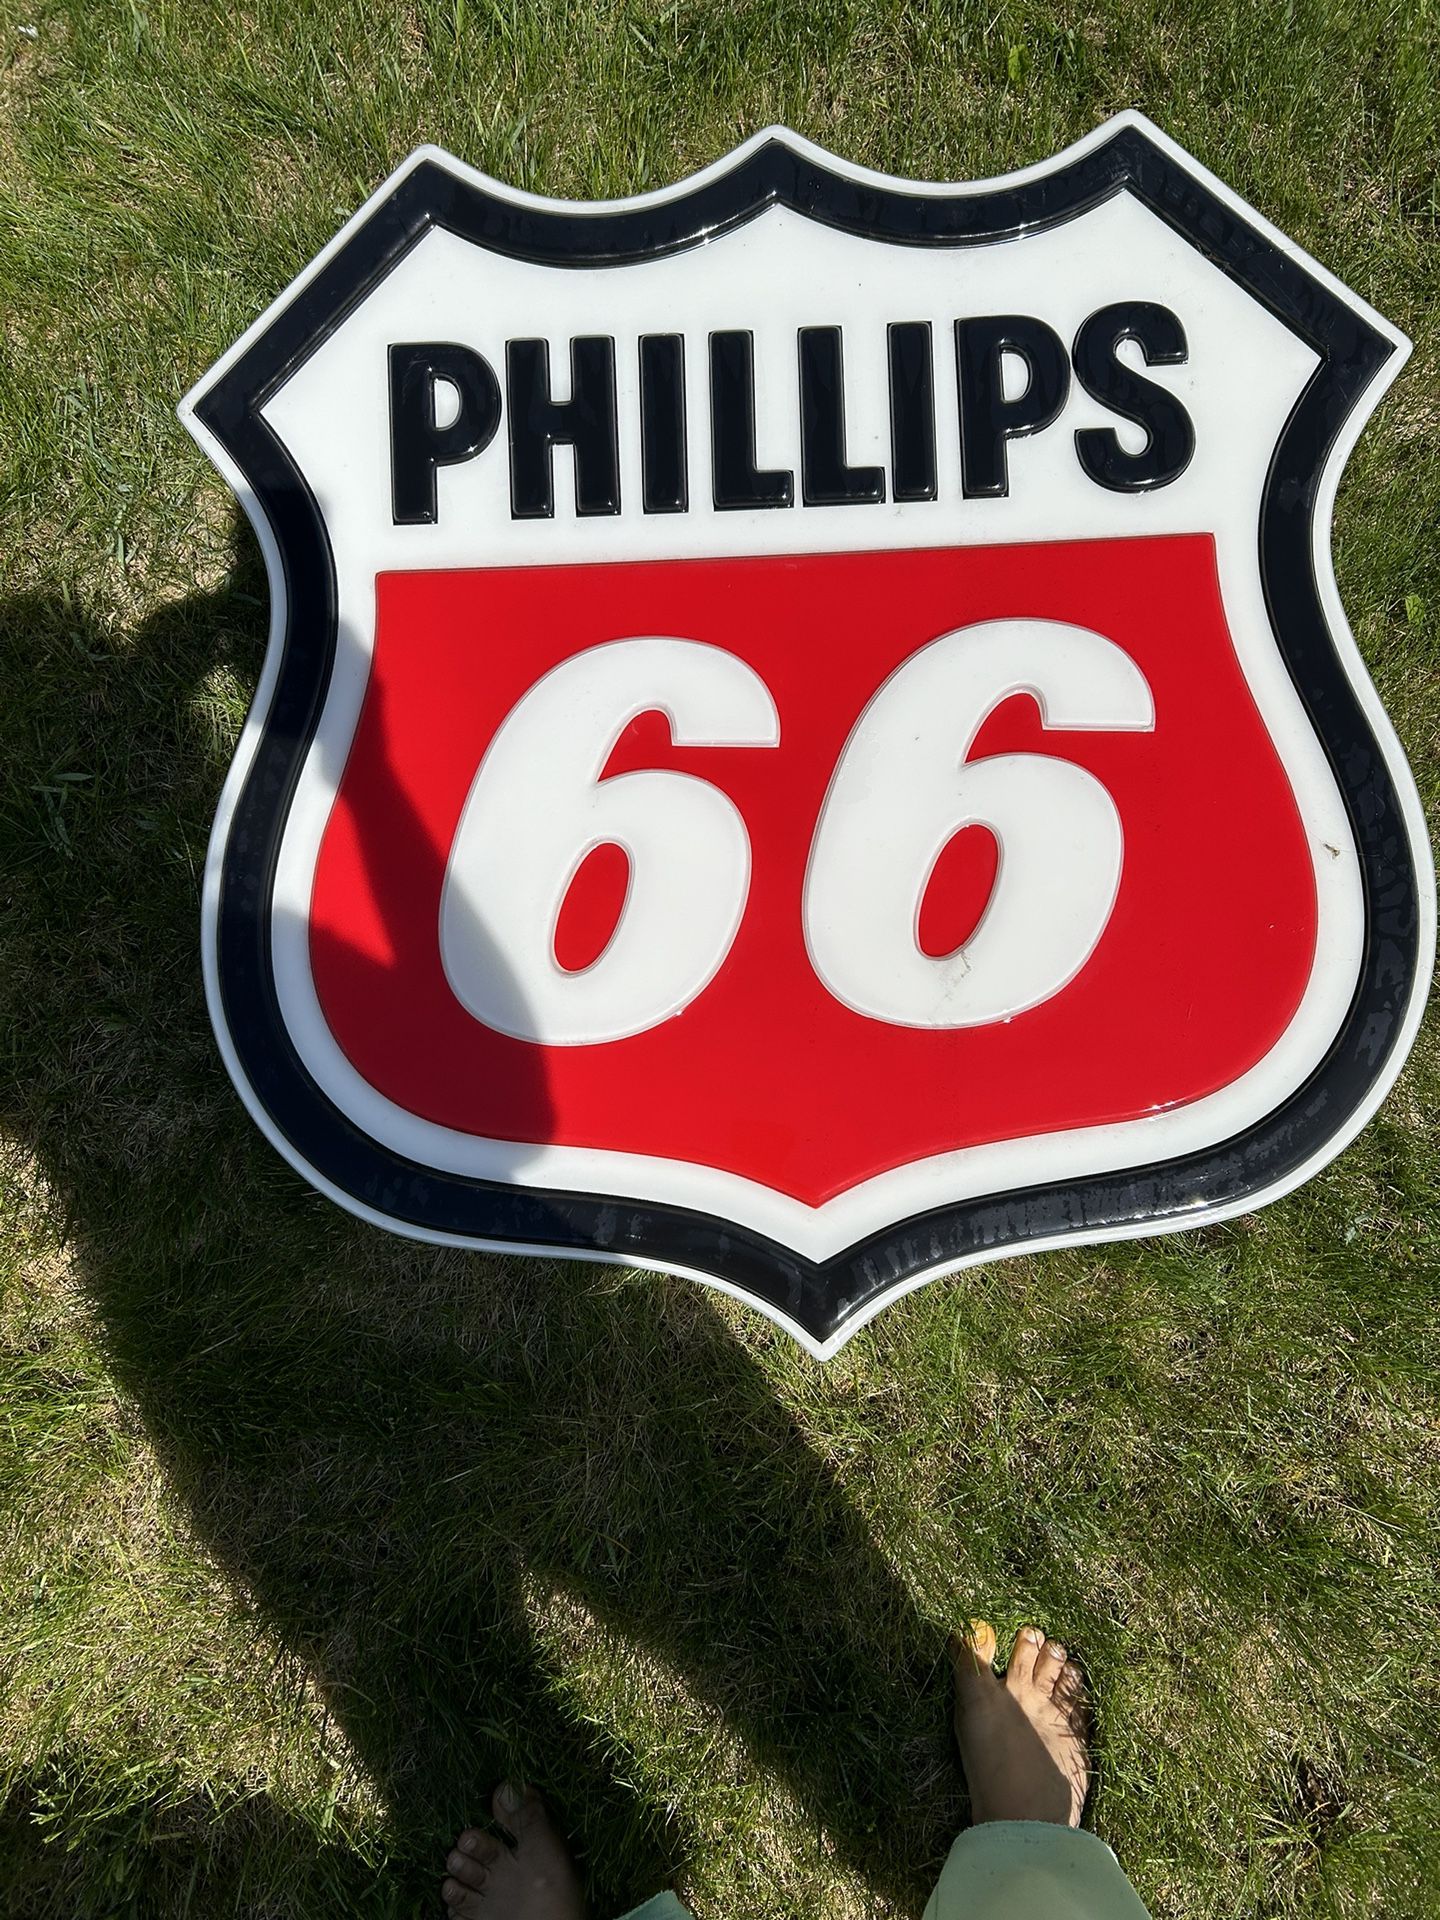 Phillips Sign